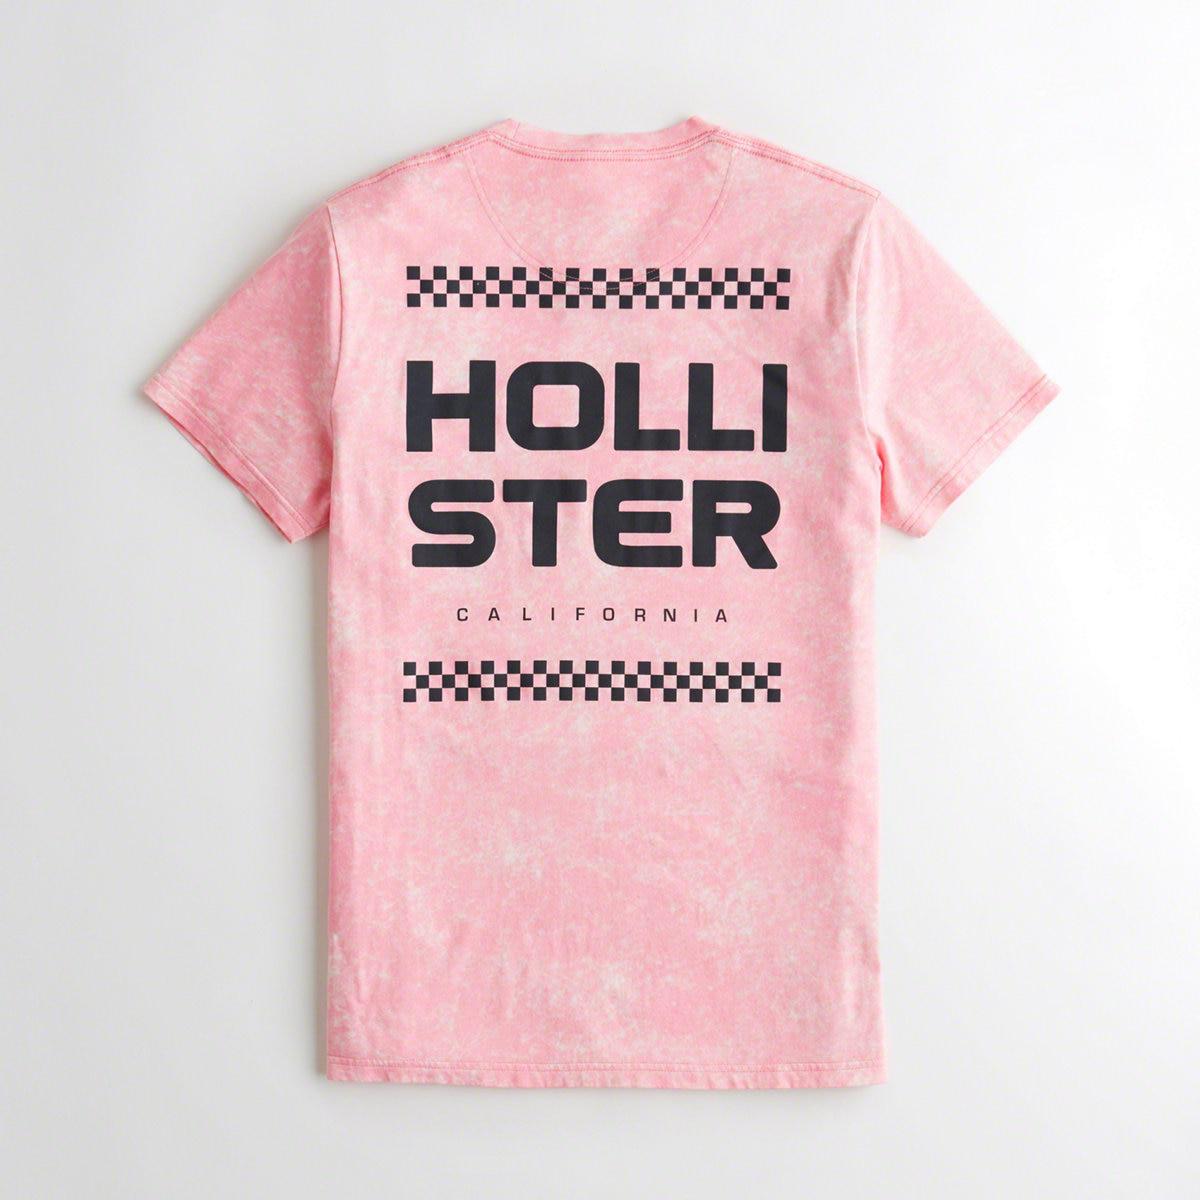 Guys Tie Dye Checkerboard Graphic Tee From Hollister